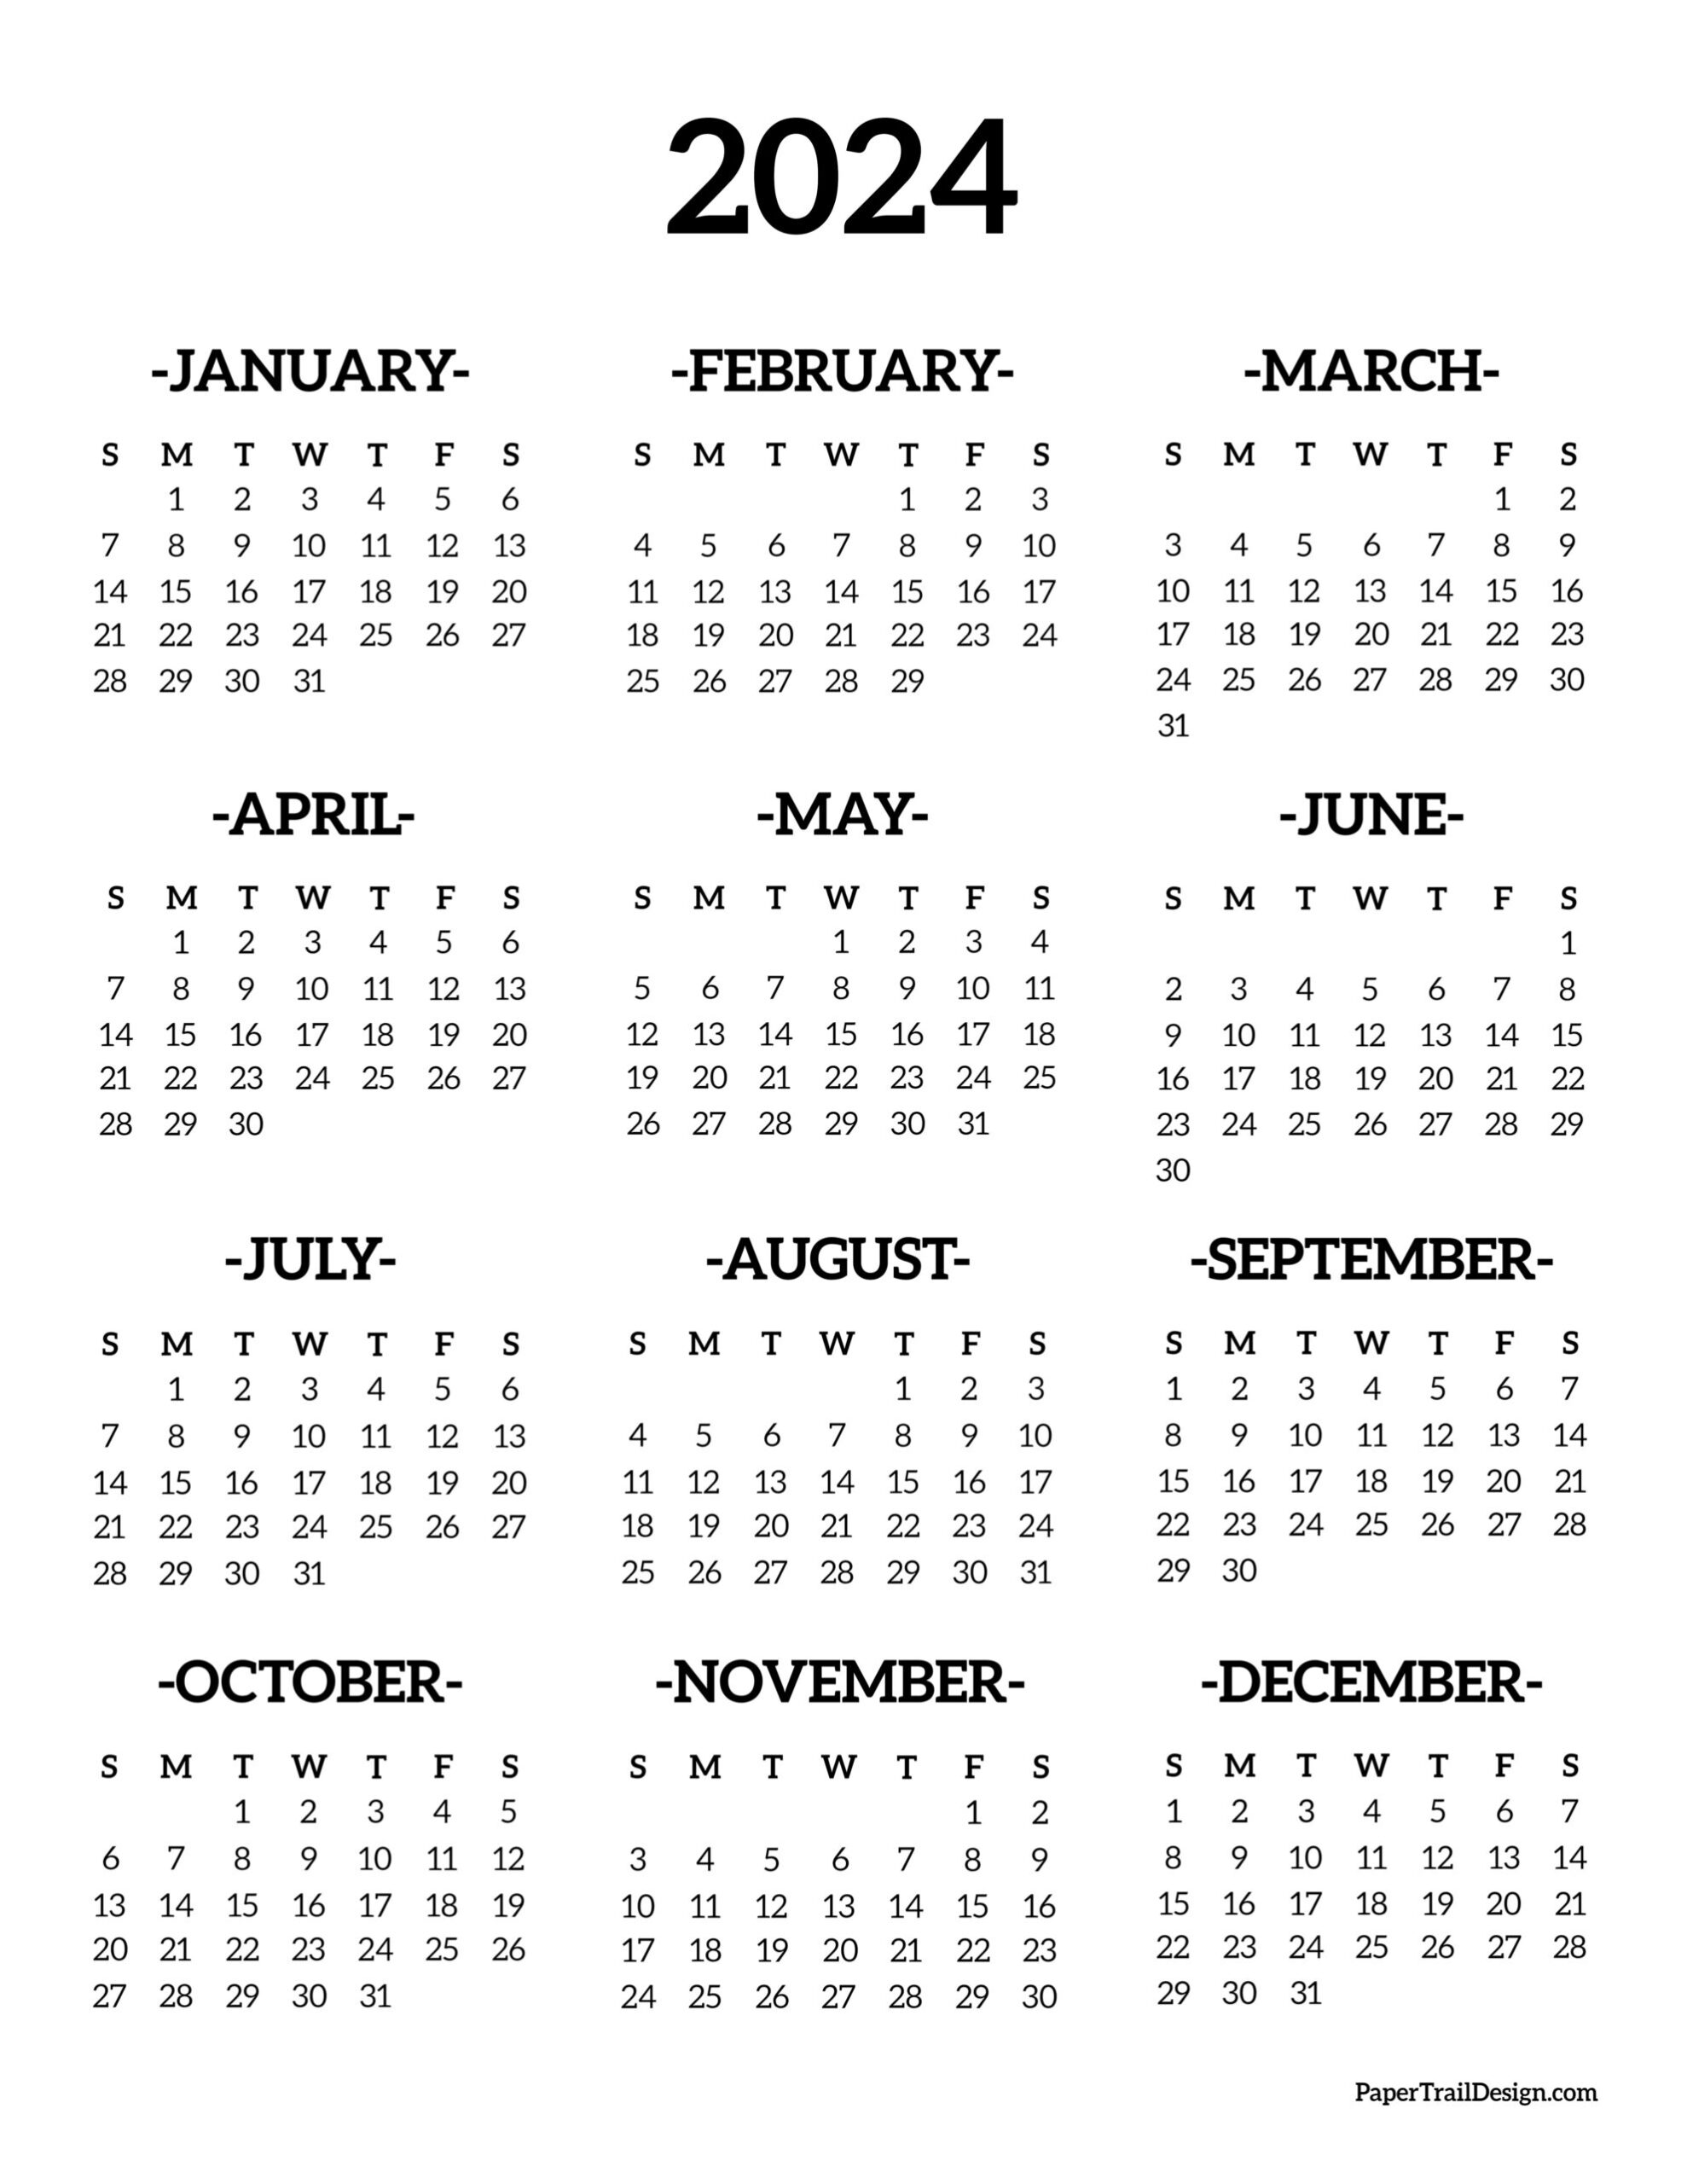 Calendar 2024 Printable One Page - Paper Trail Design | 2024 Yearly Calendar Pdf